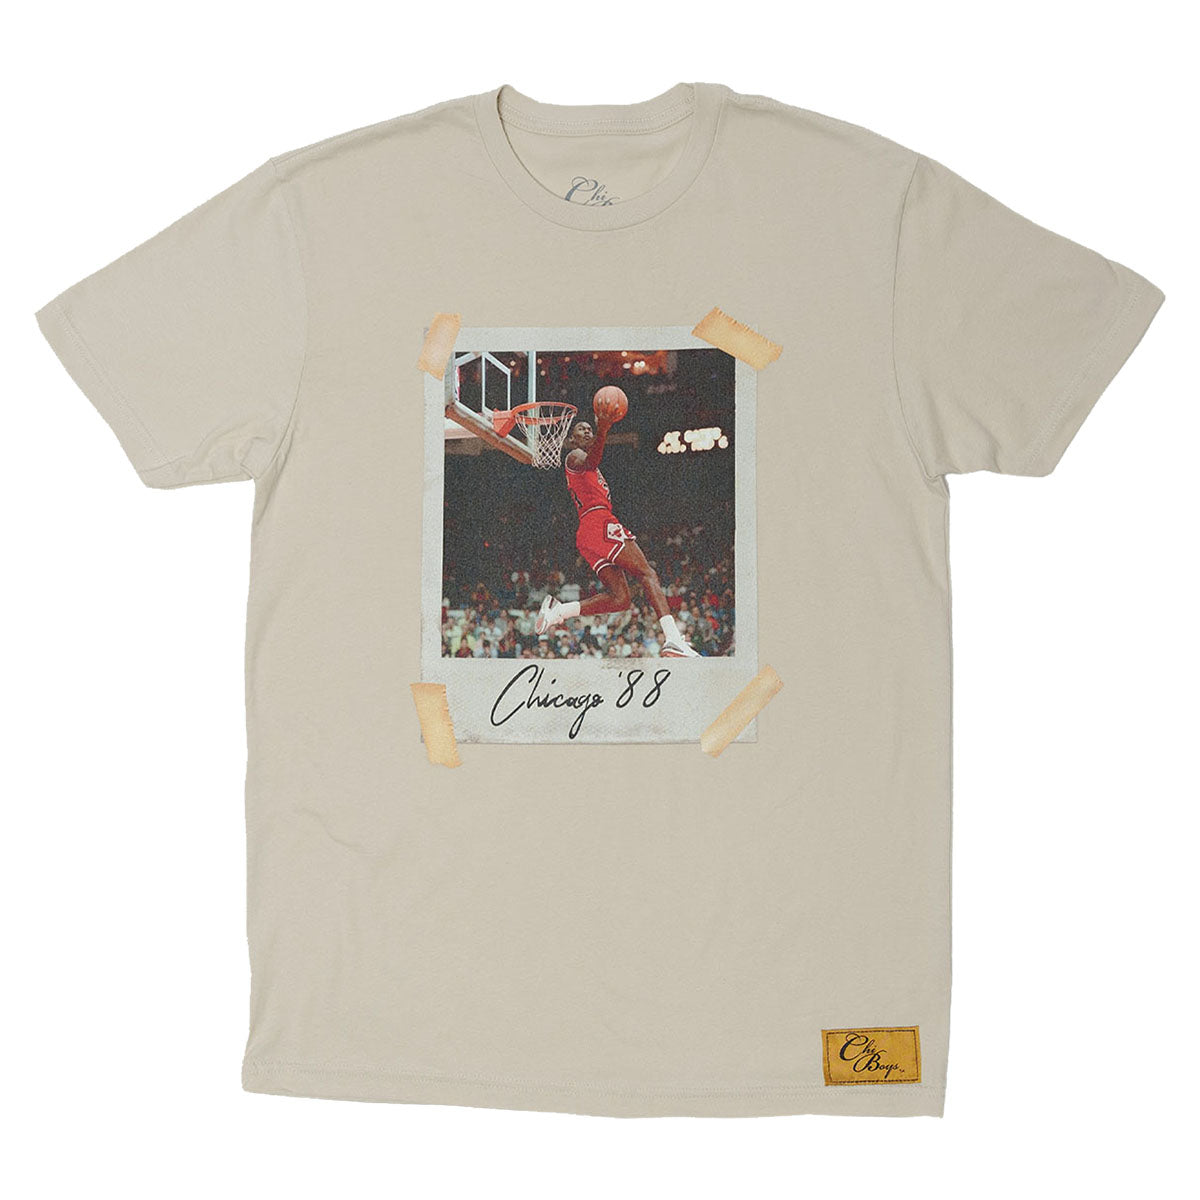 Chicago '88 Pay Homage Tee (Sand)